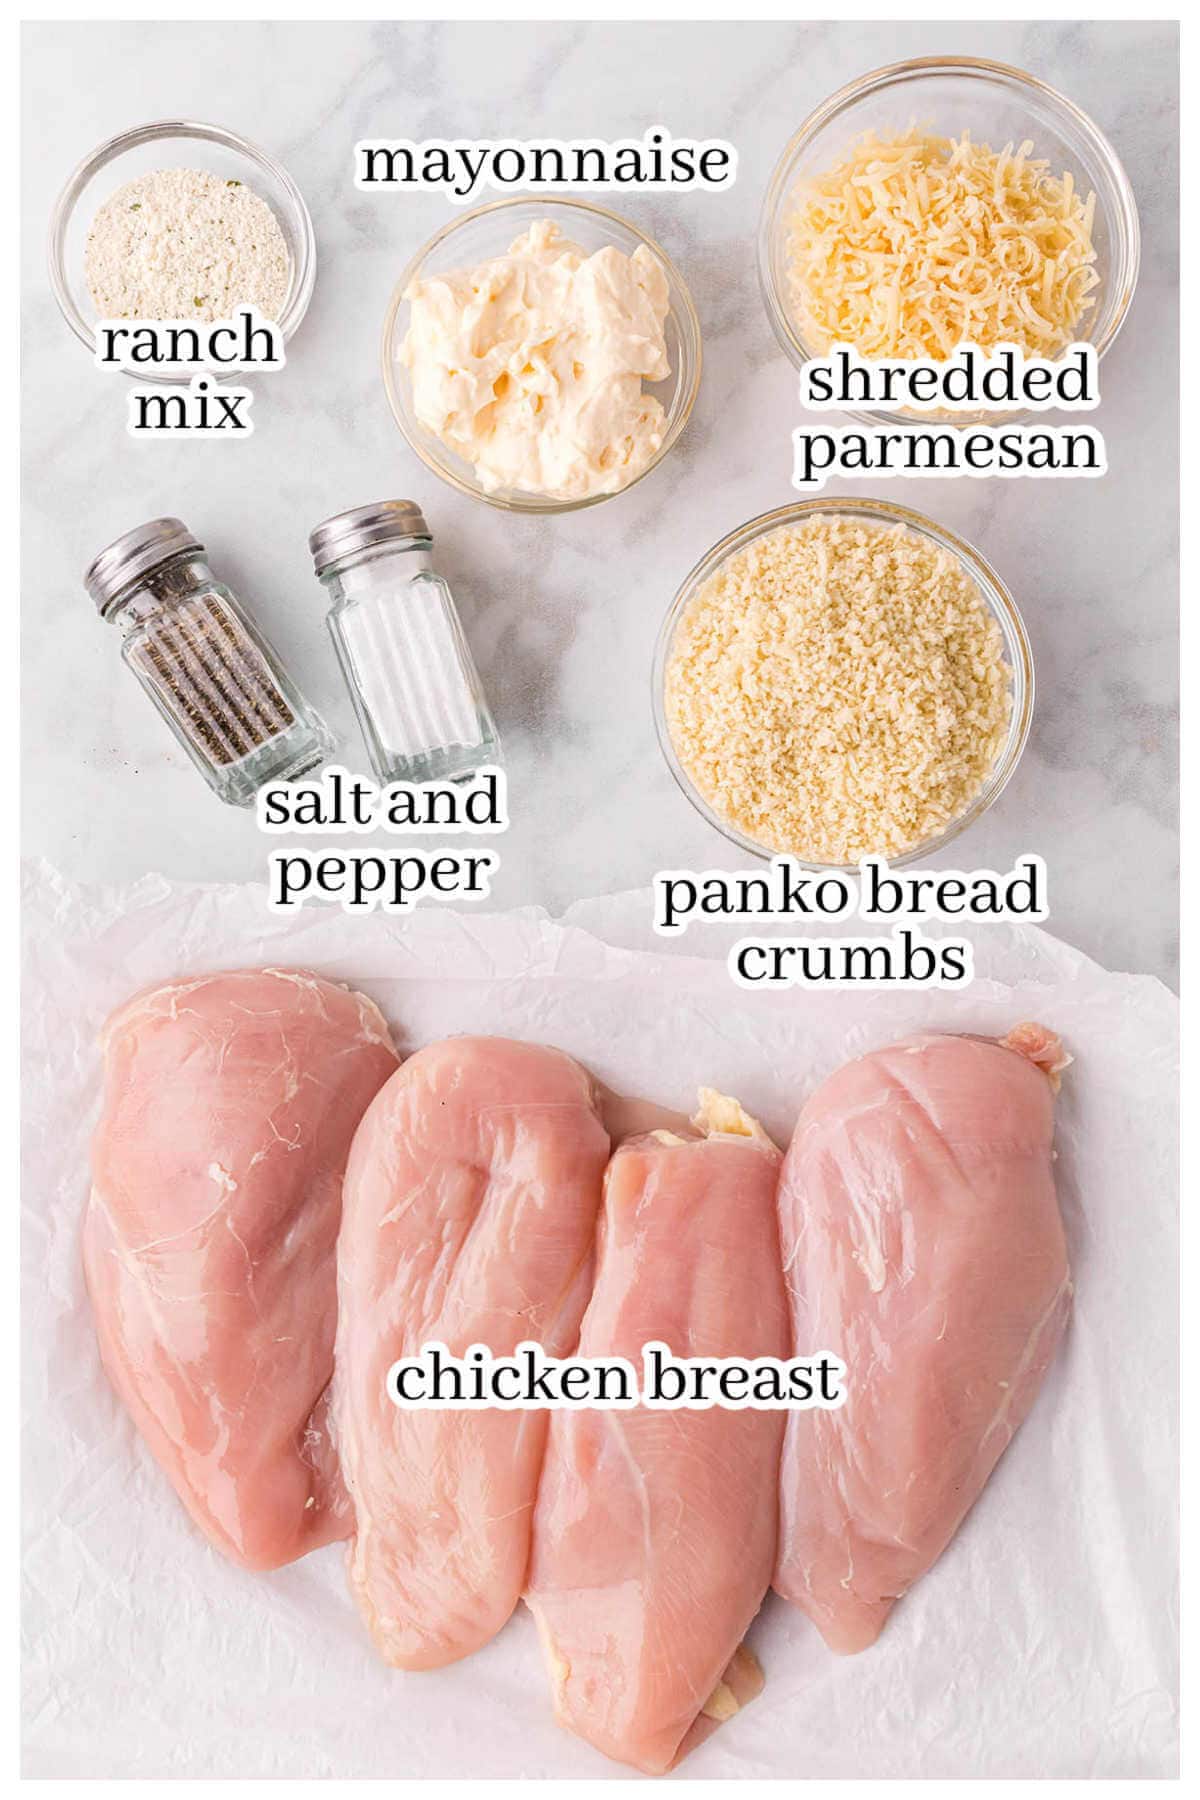 Ingredients for the crispy baked chicken recipe. With print overlay.